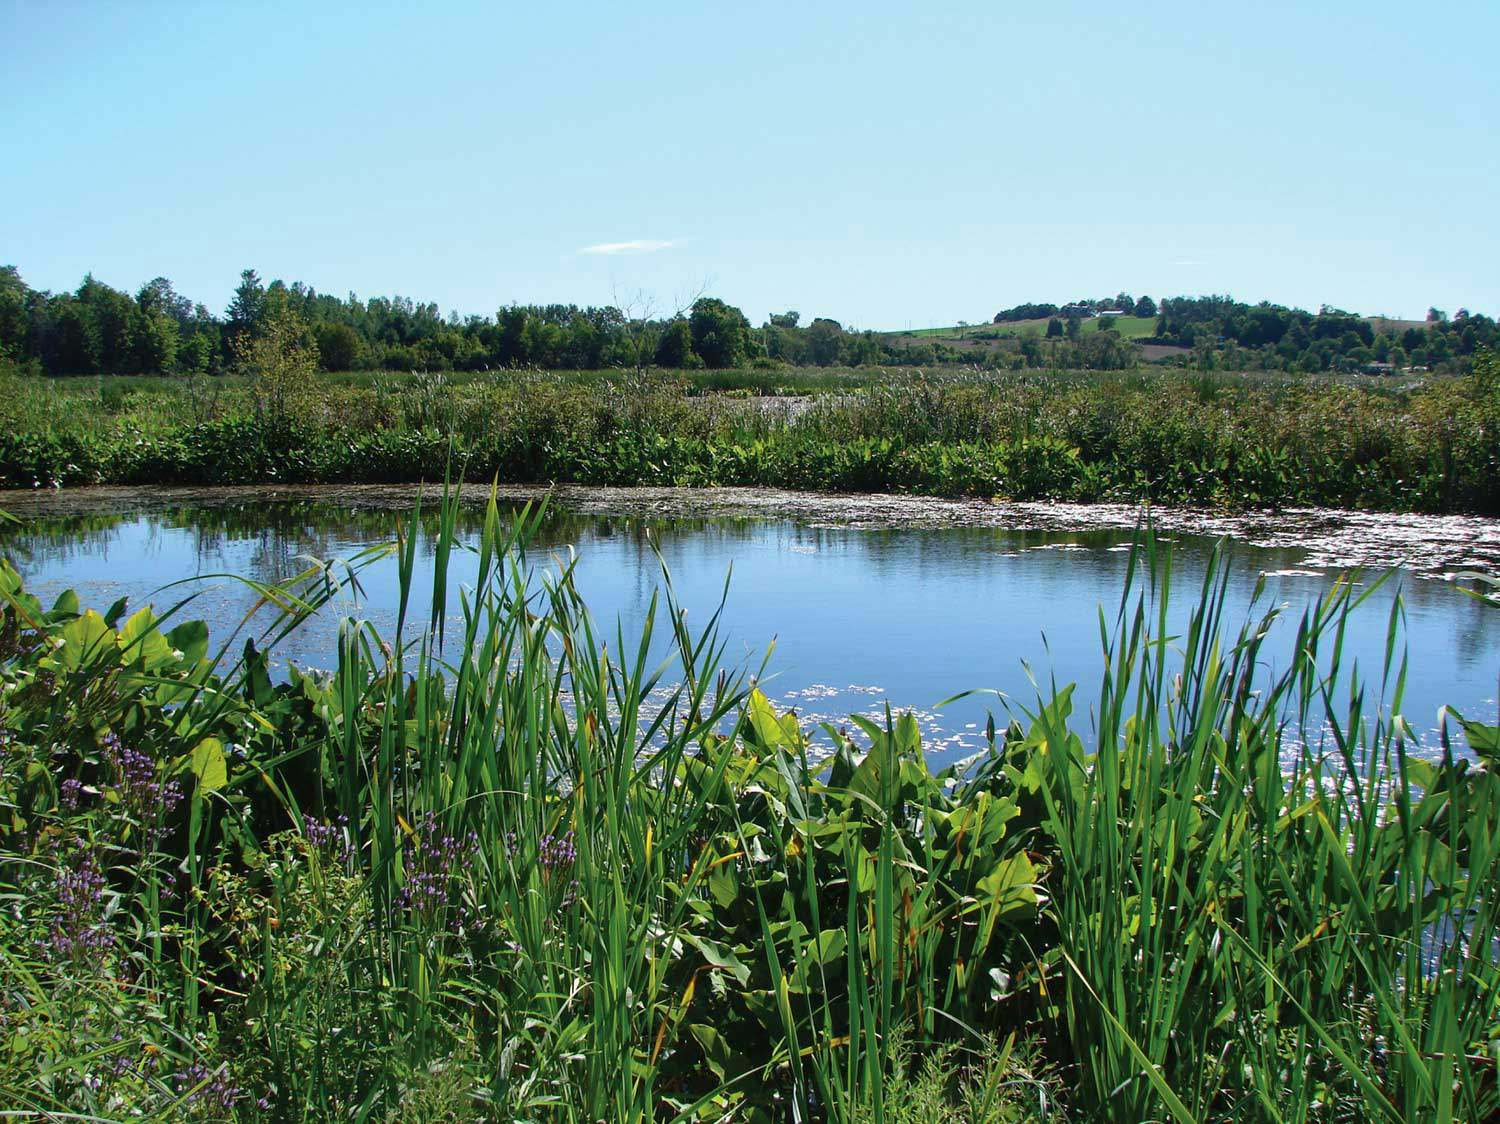 This fragile wetland at the Lone Pine Marsh Sanctuary in Northumberland County is rich in biodiversity.